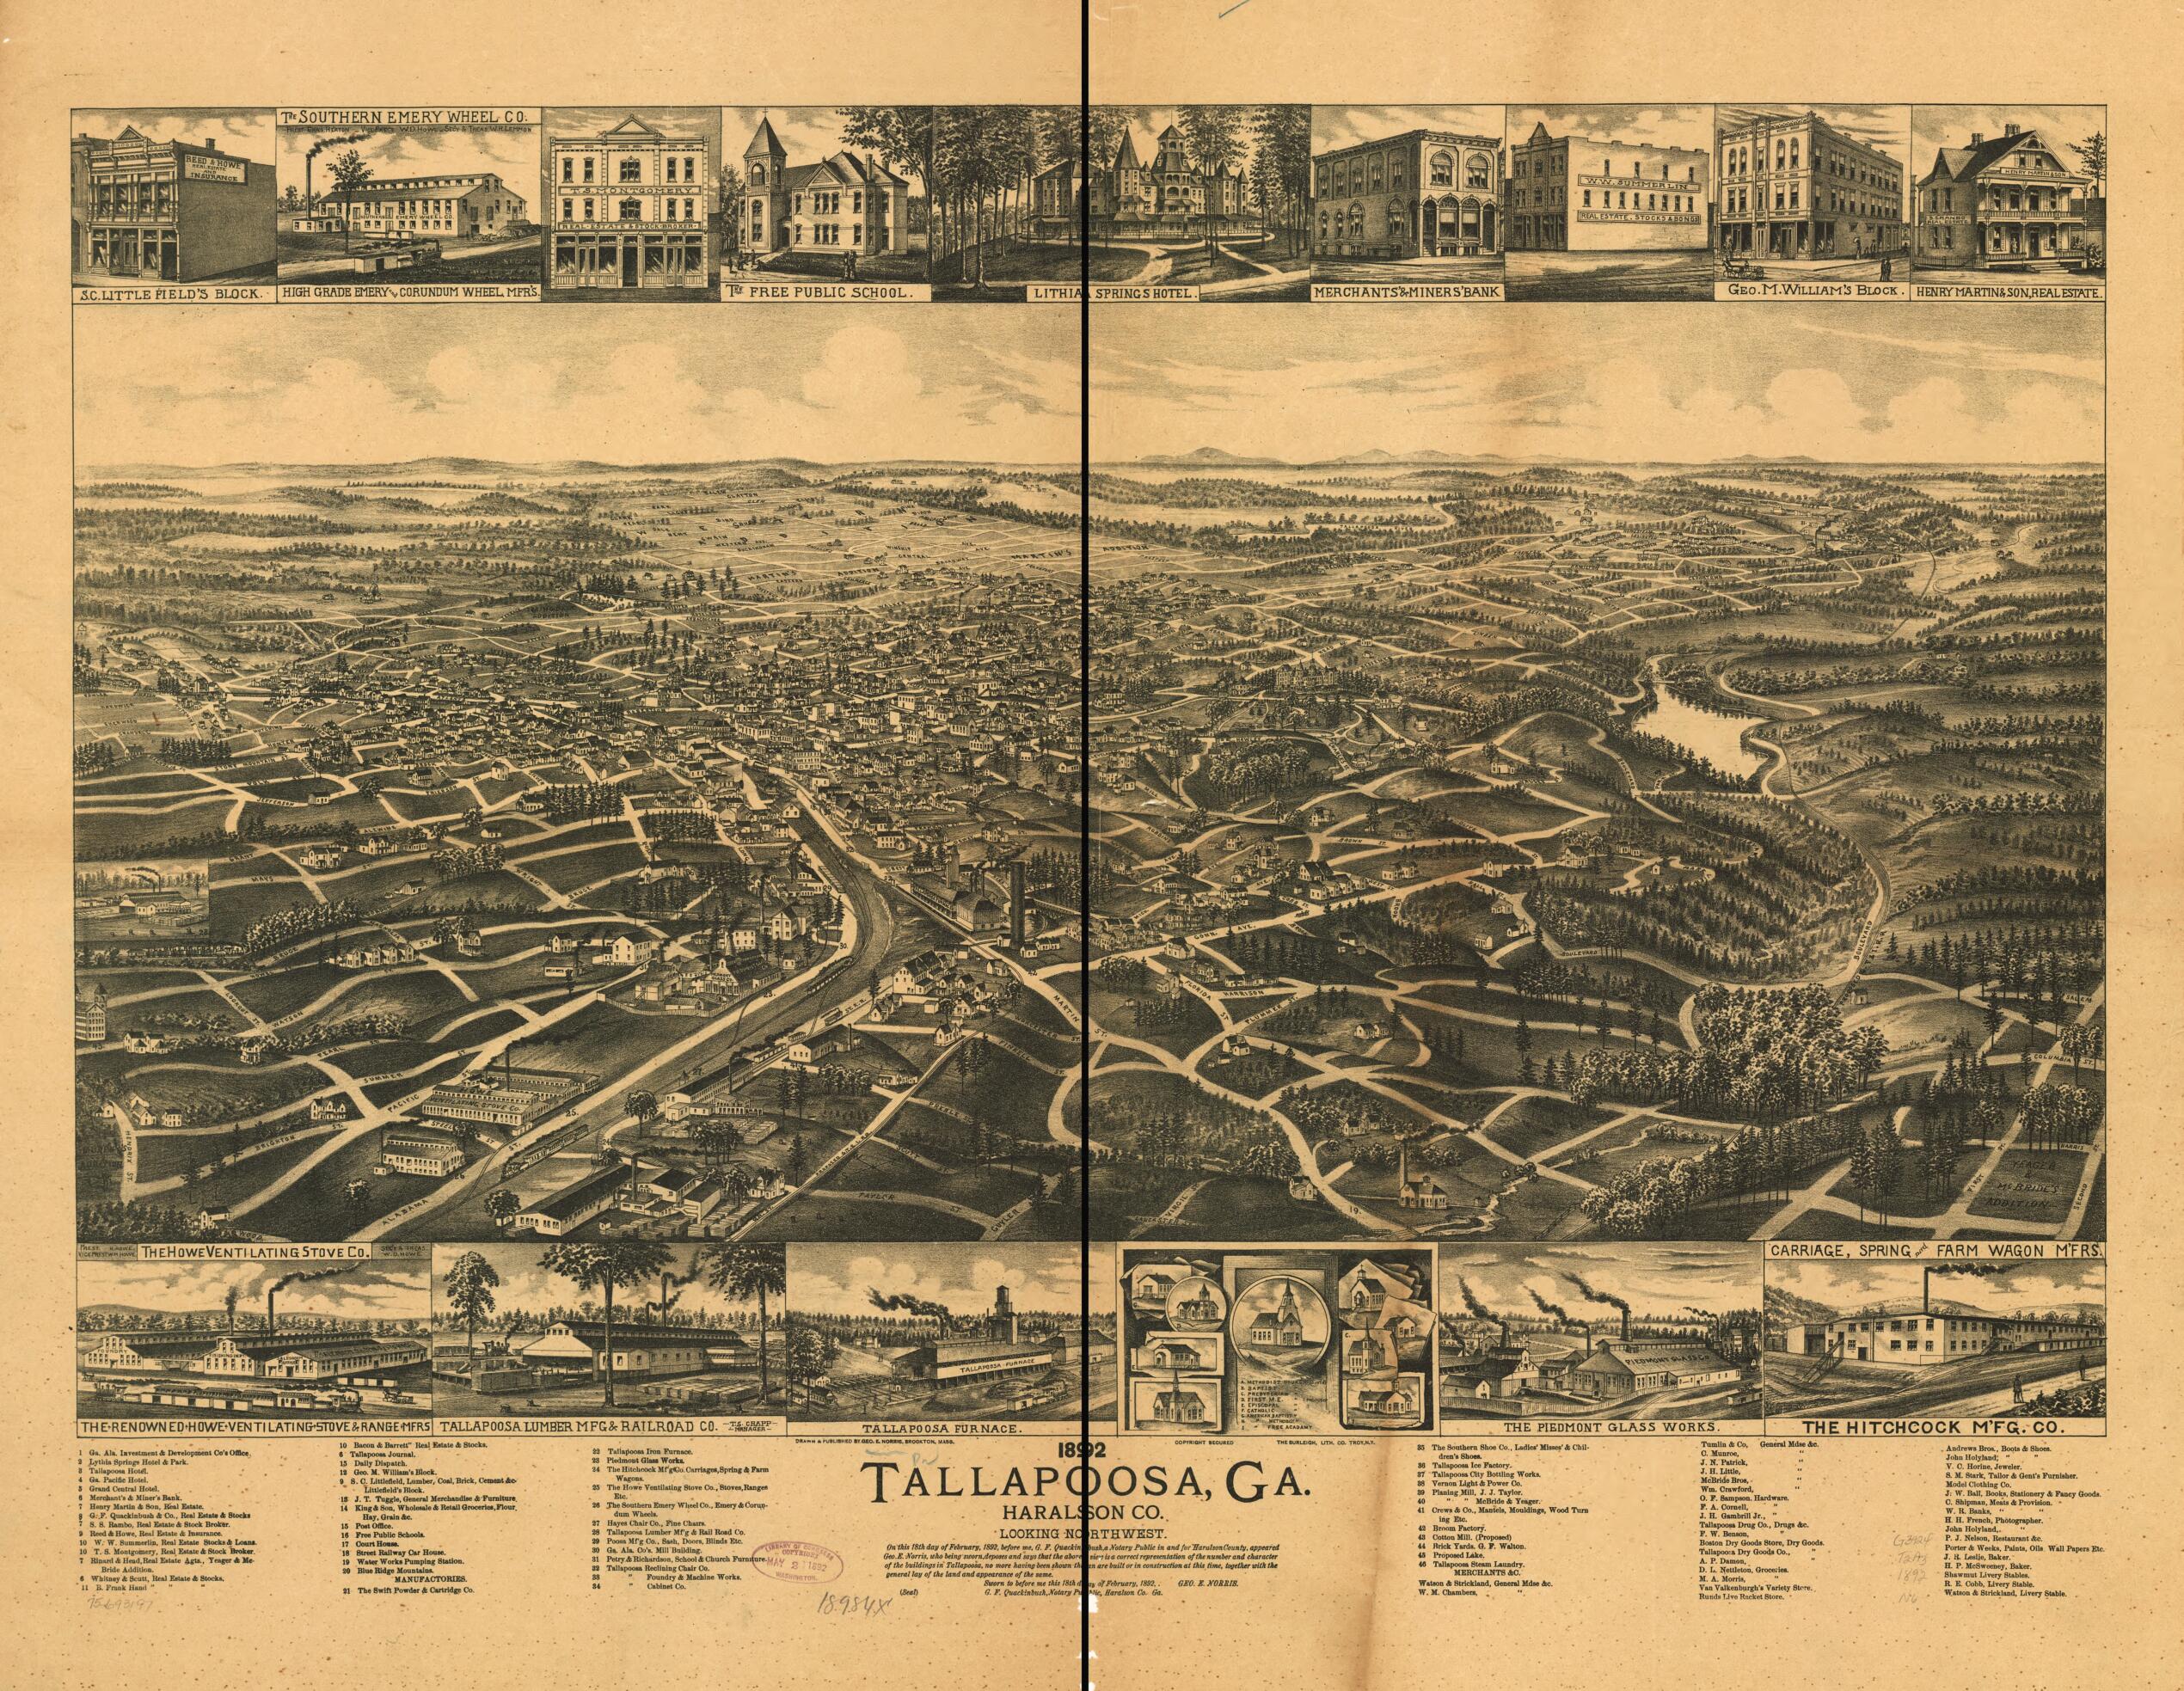 This old map of Tallapoosa, Georgia Haralson Co from 1892 was created by  Burleigh Litho, George E. Norris in 1892